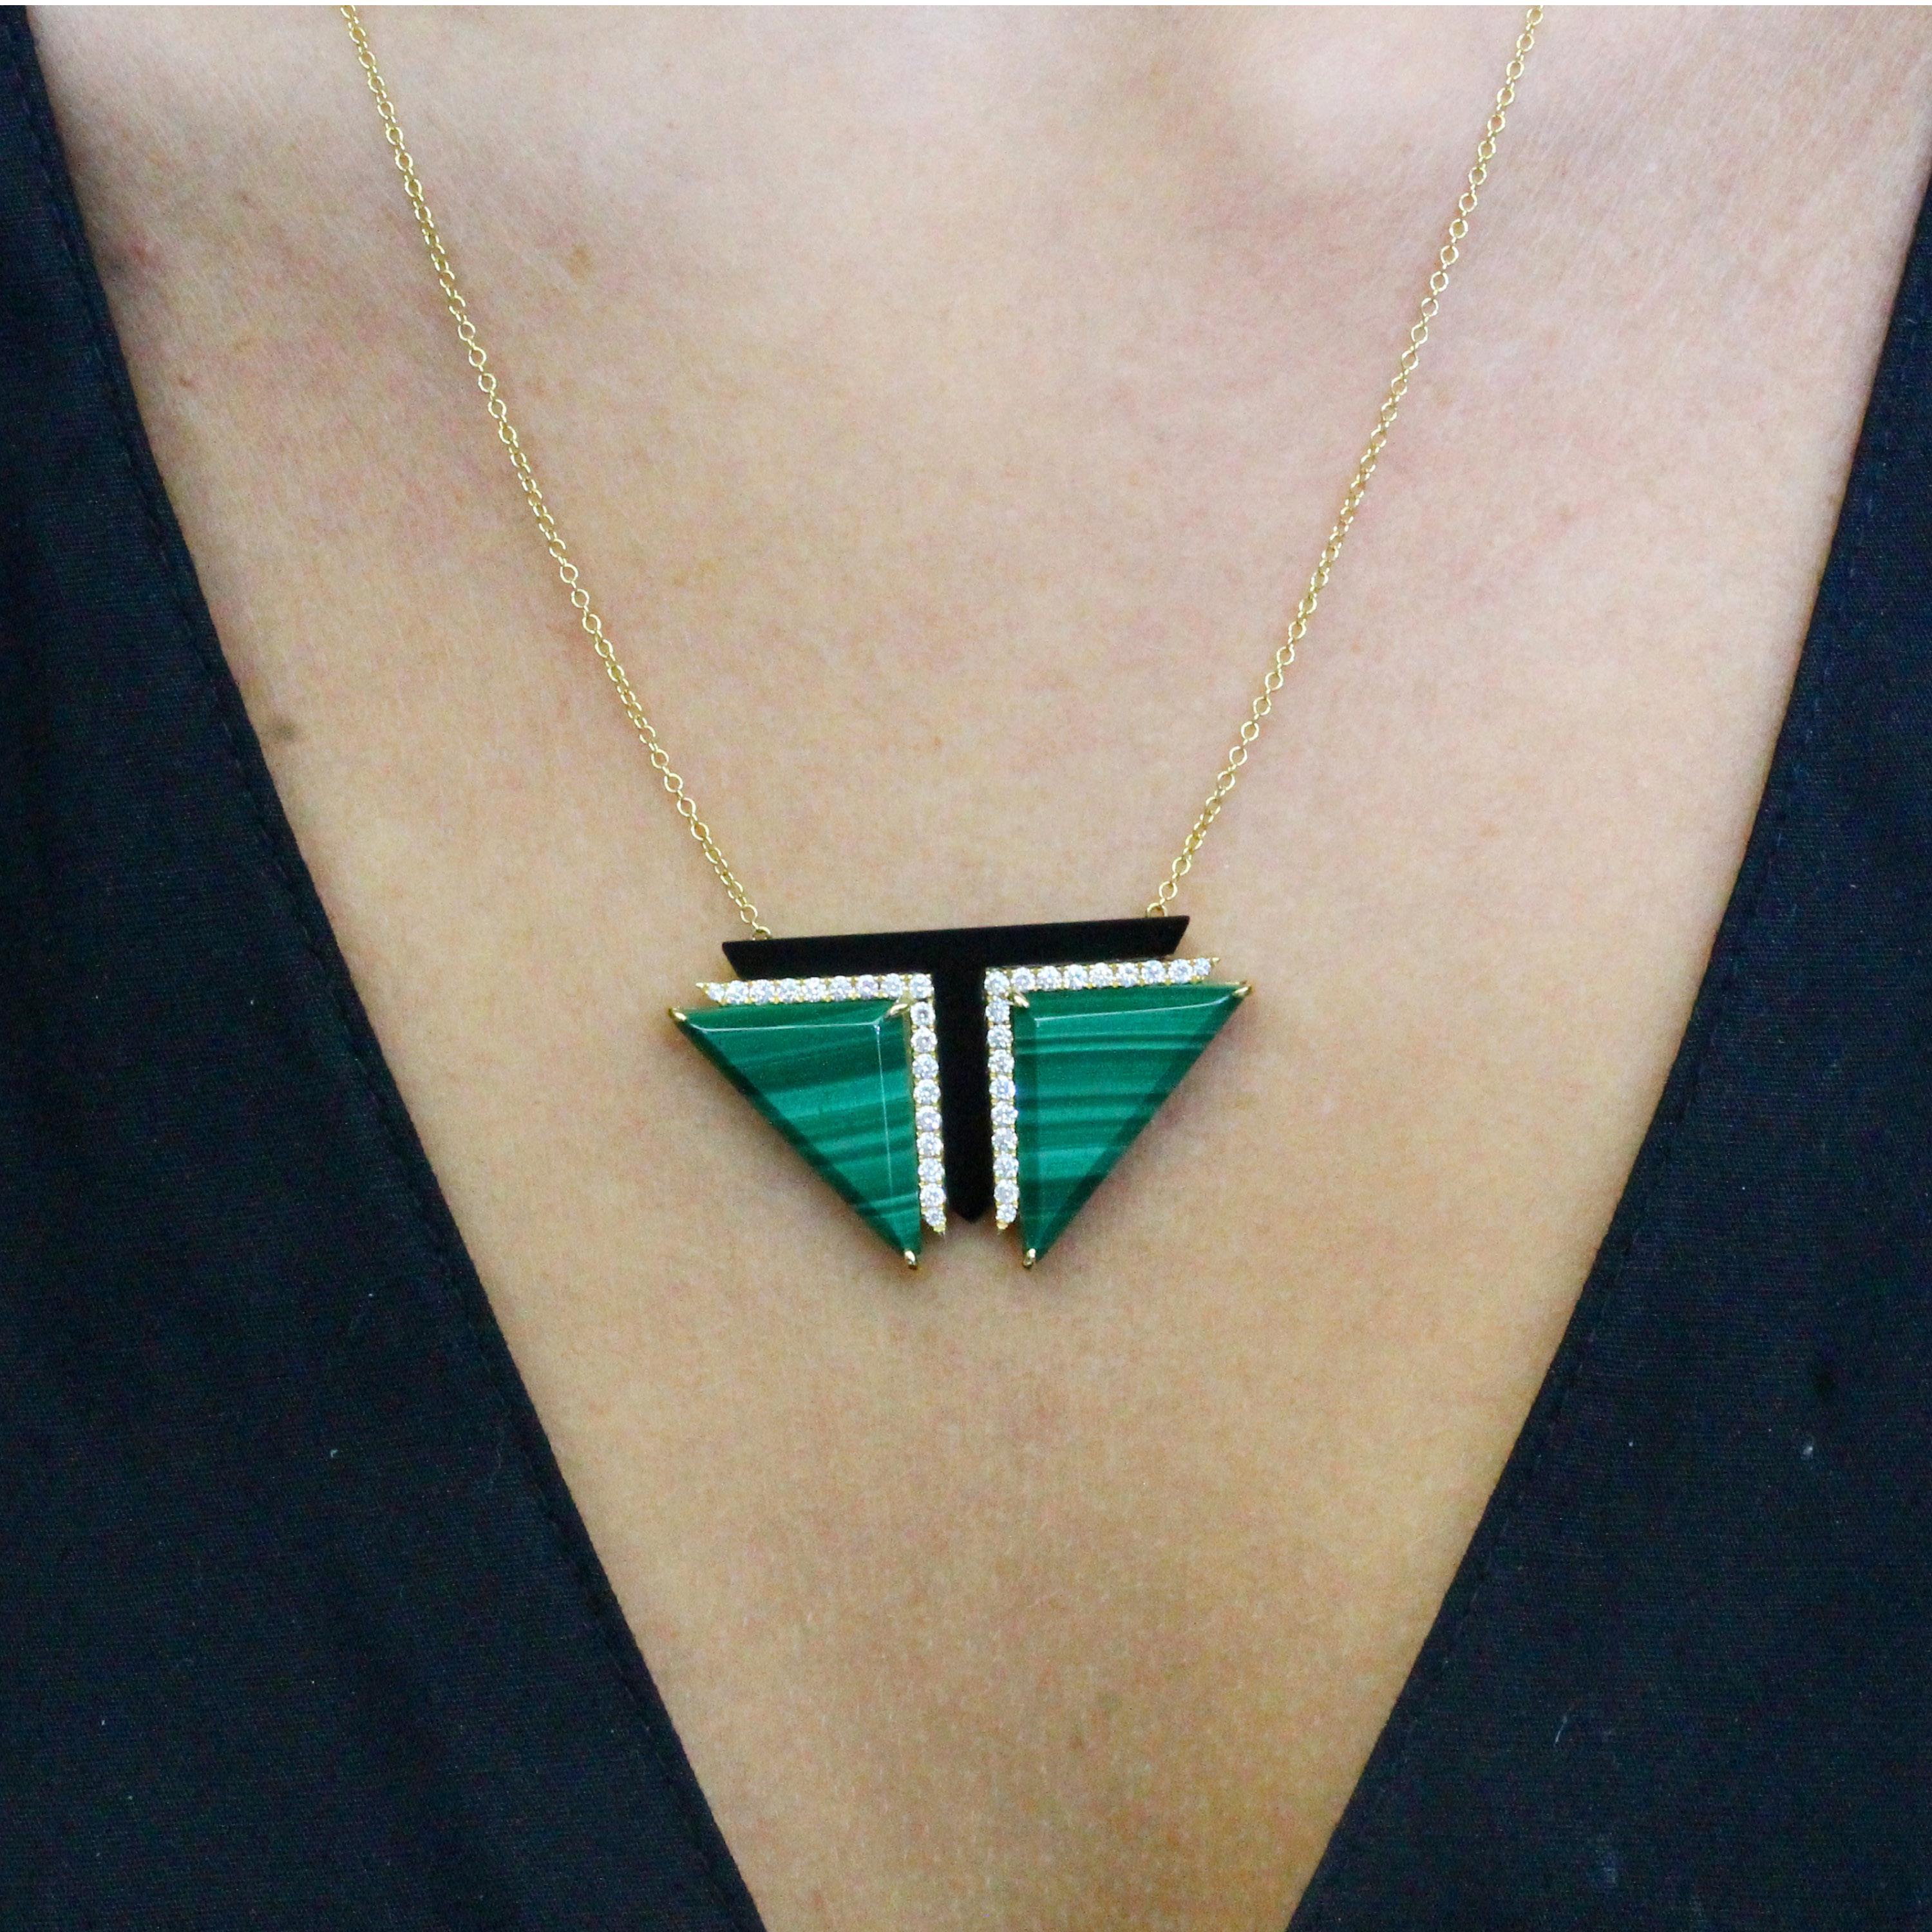 Art-Deco style Necklace featuring Triangular Malachite, Black Onyx, and Diamonds set in 18K yellow gold, hanging on an 18-inch Chain with 16-inch adjuster. Malachite is stone of balance and abundance, and often called 